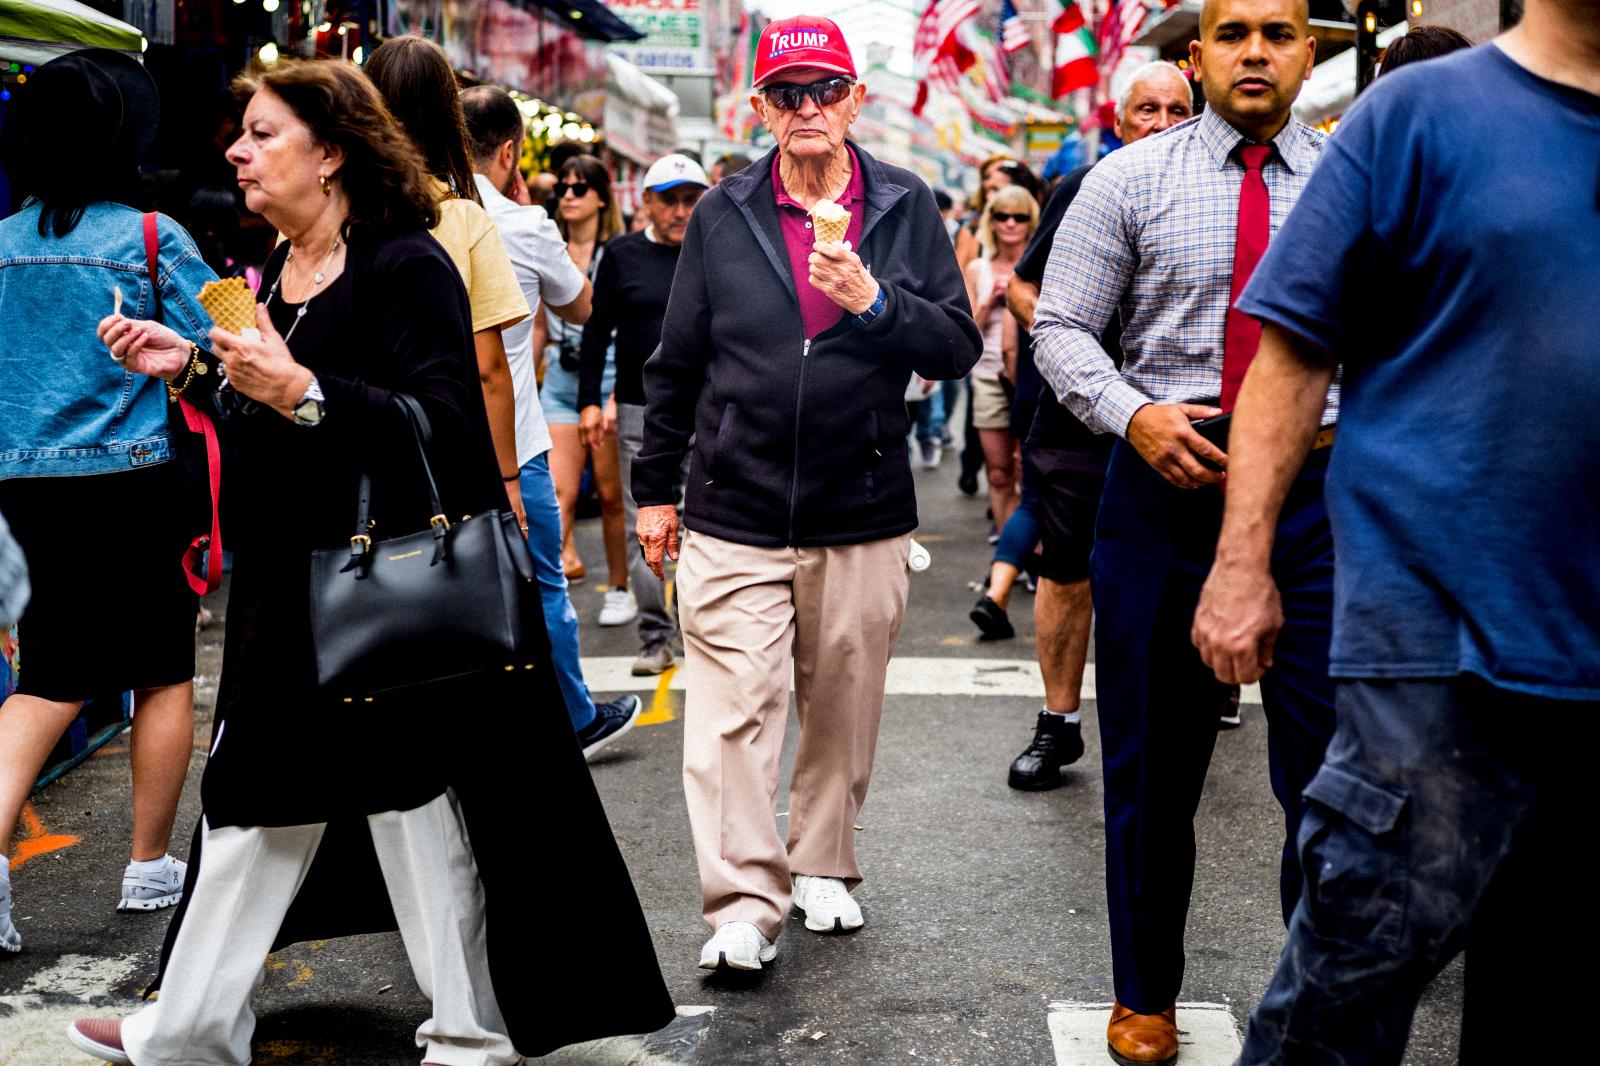 Street Photography/Color Works -  Mulberry Street, Manhattan NYC  September 2019 